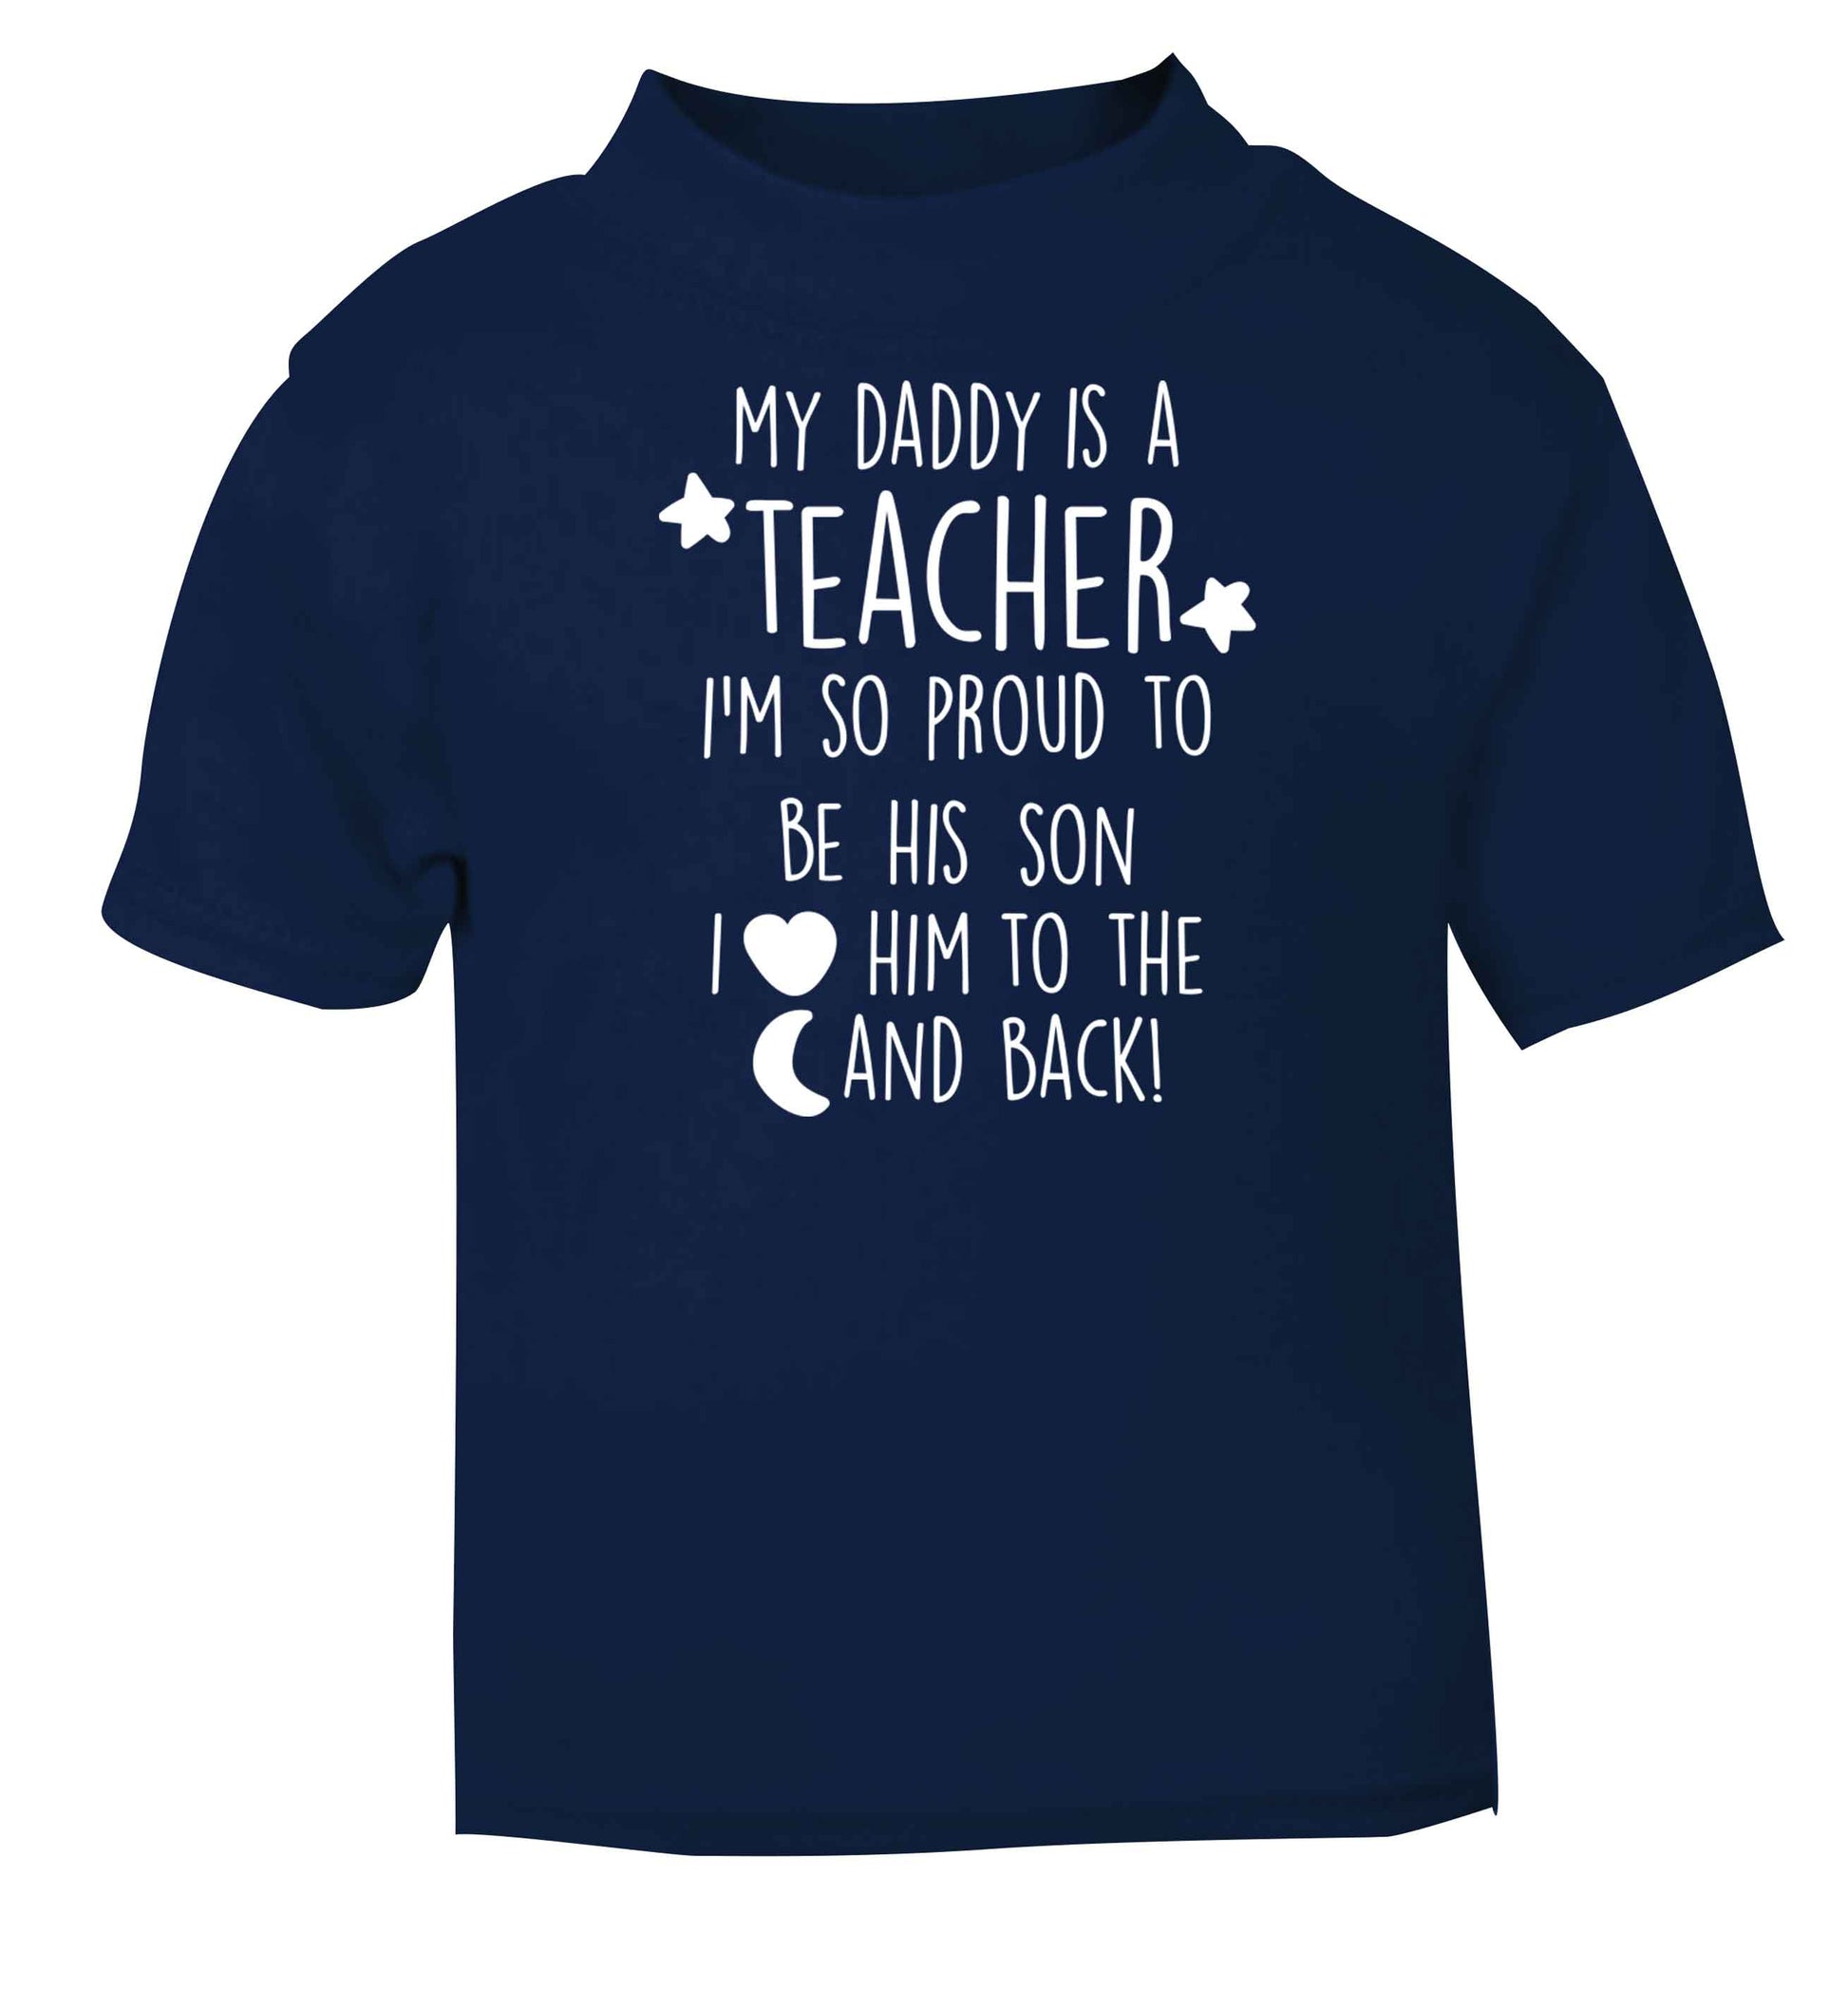 My daddy is a teacher I'm so proud to be his son I love her to the moon and back navy baby toddler Tshirt 2 Years